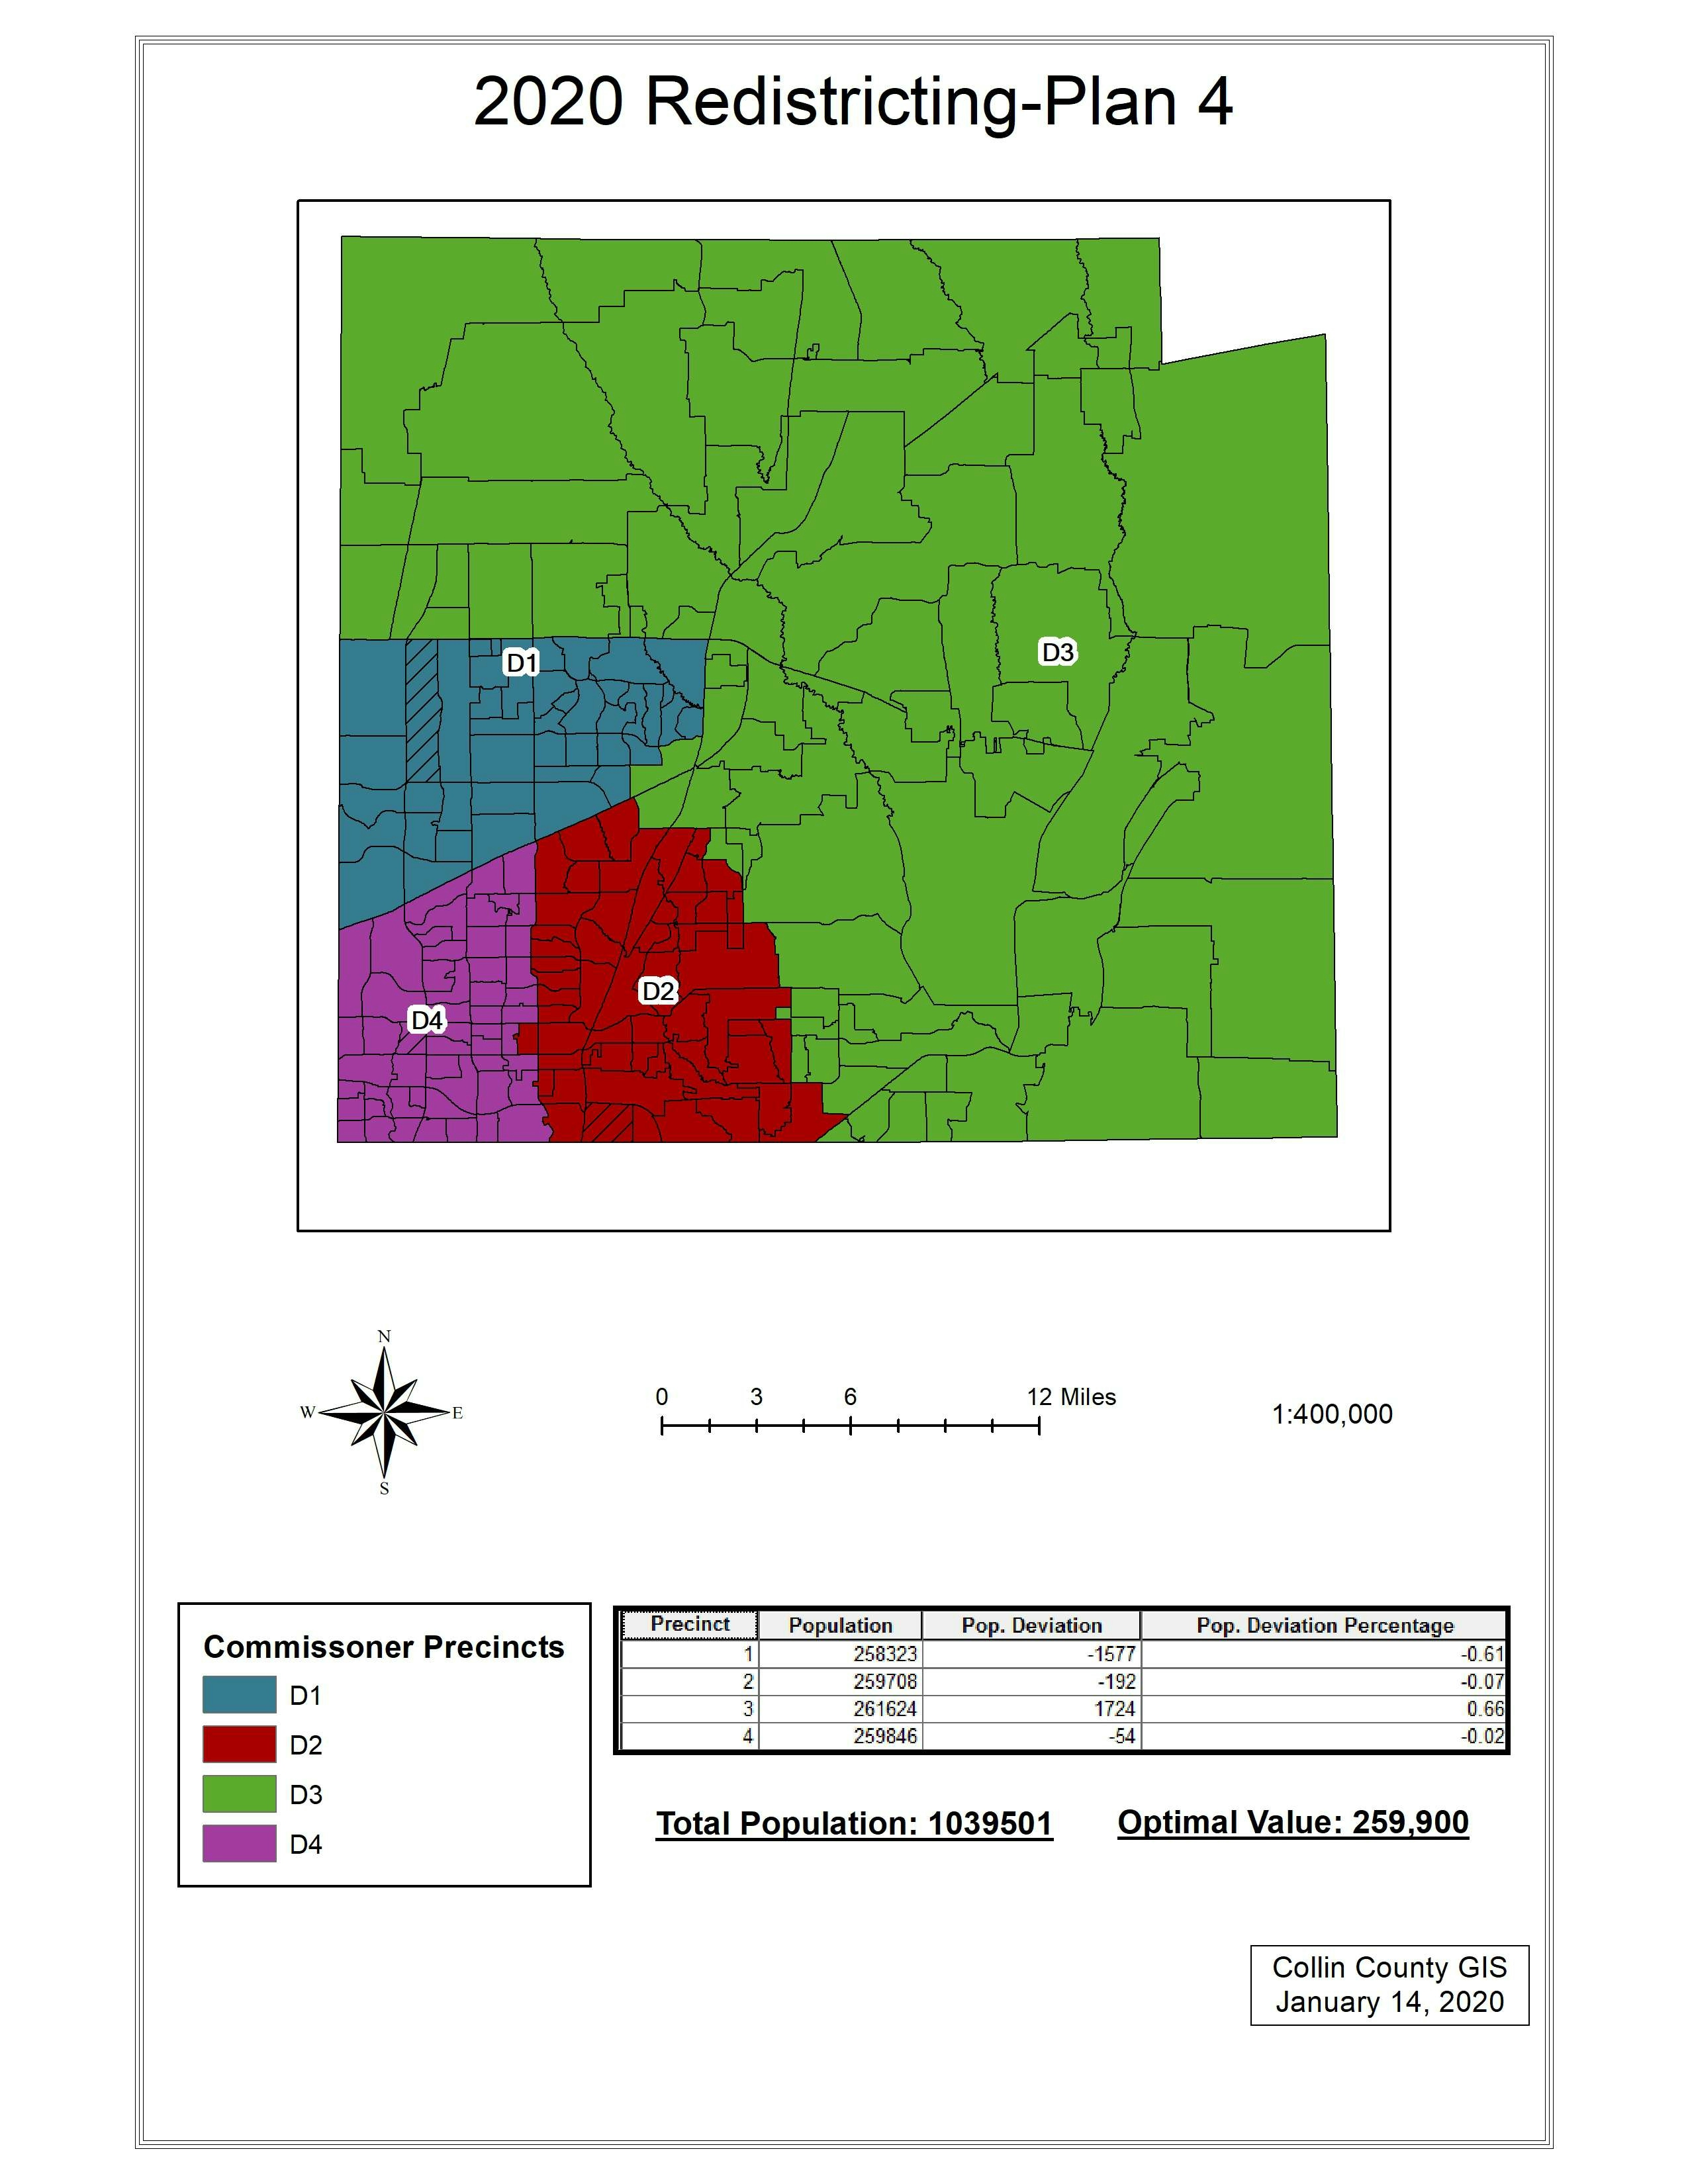 Redistricting Plan 4-Collin County